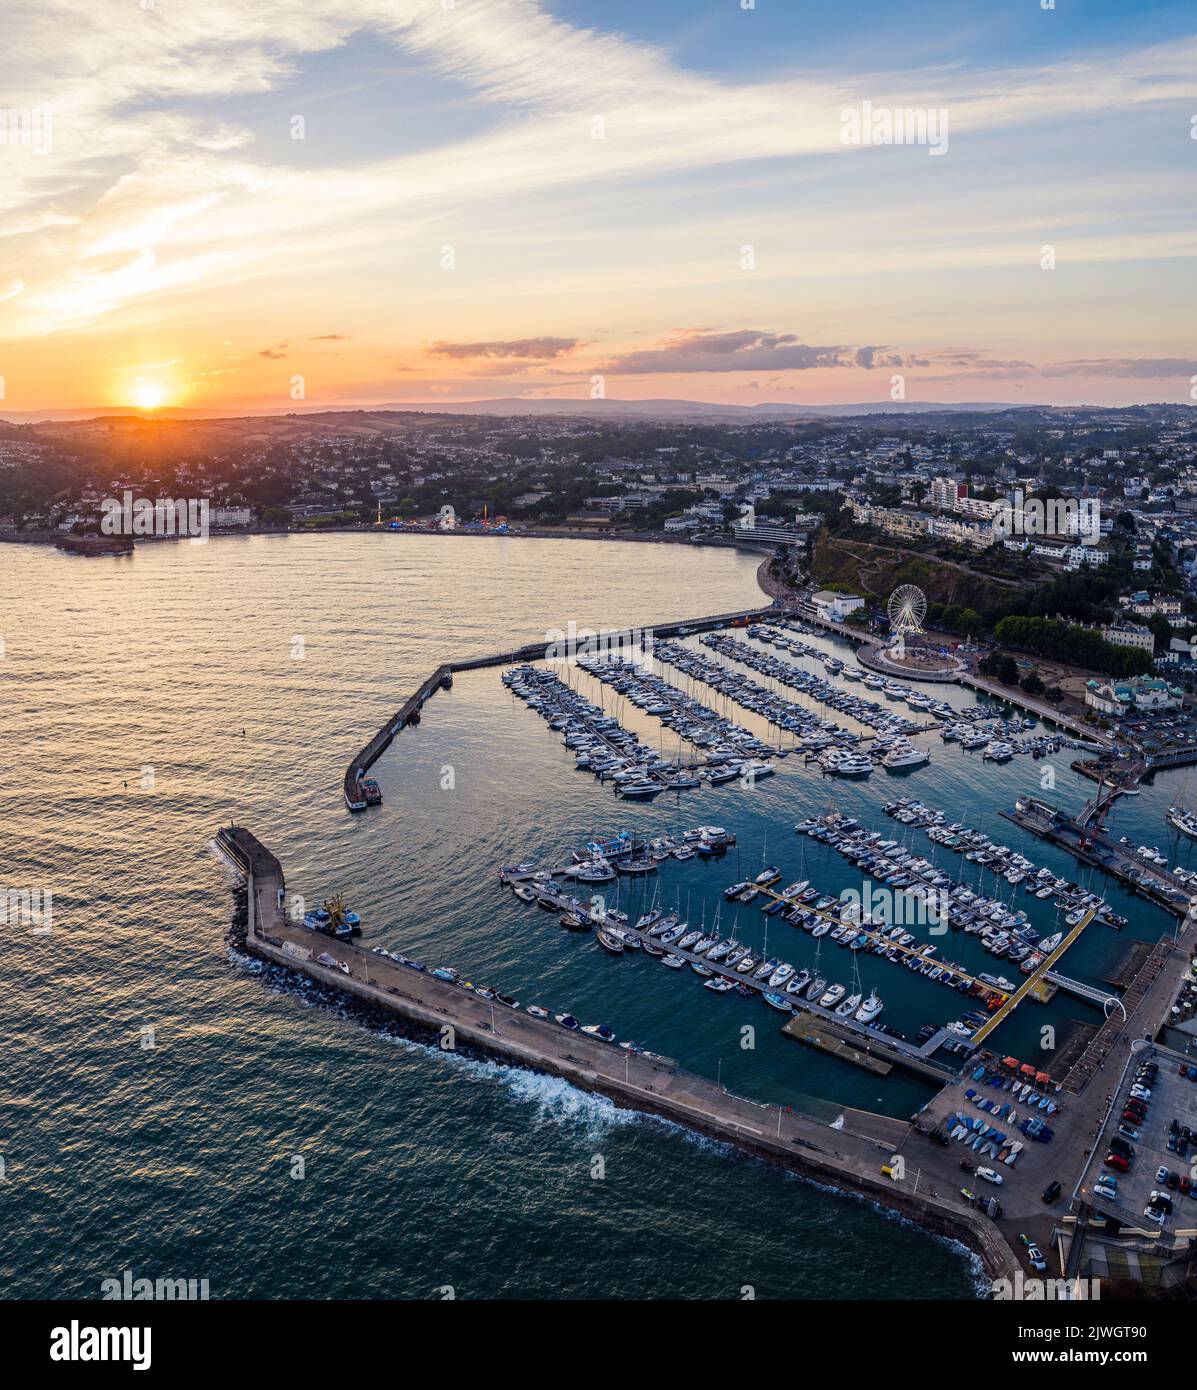 Sunset over Torquay Harbour and Marina, English Riviera from a drone, Devon, England, Europe Stock Photo